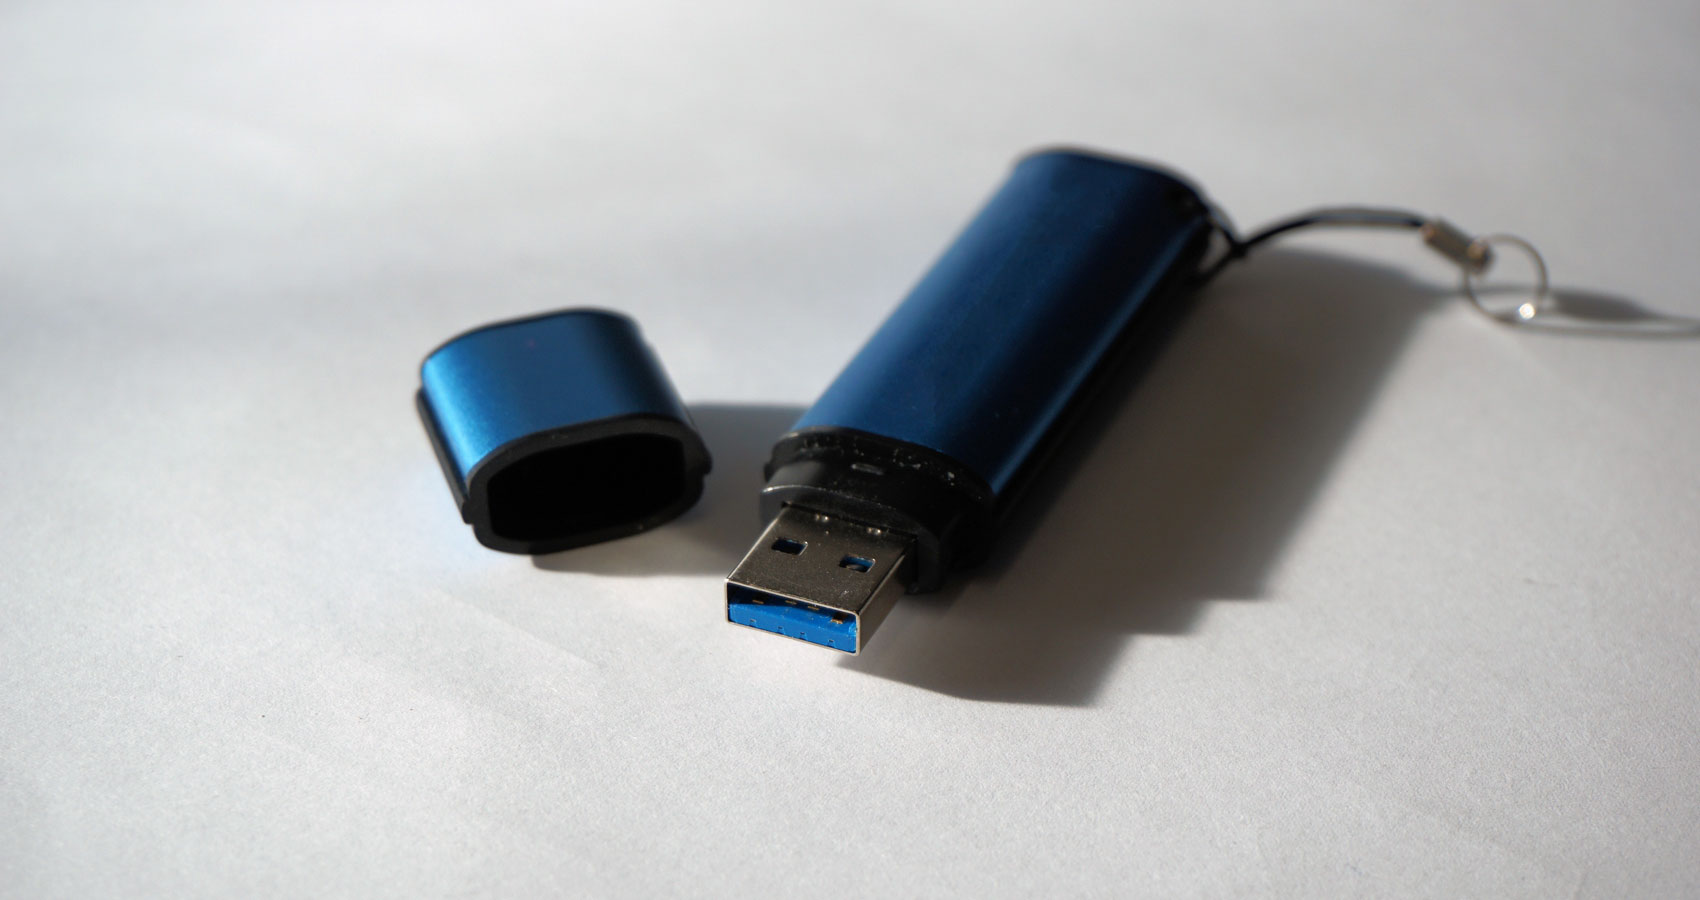 Pendrive, a poem written by Hsenura at Spilwords.com